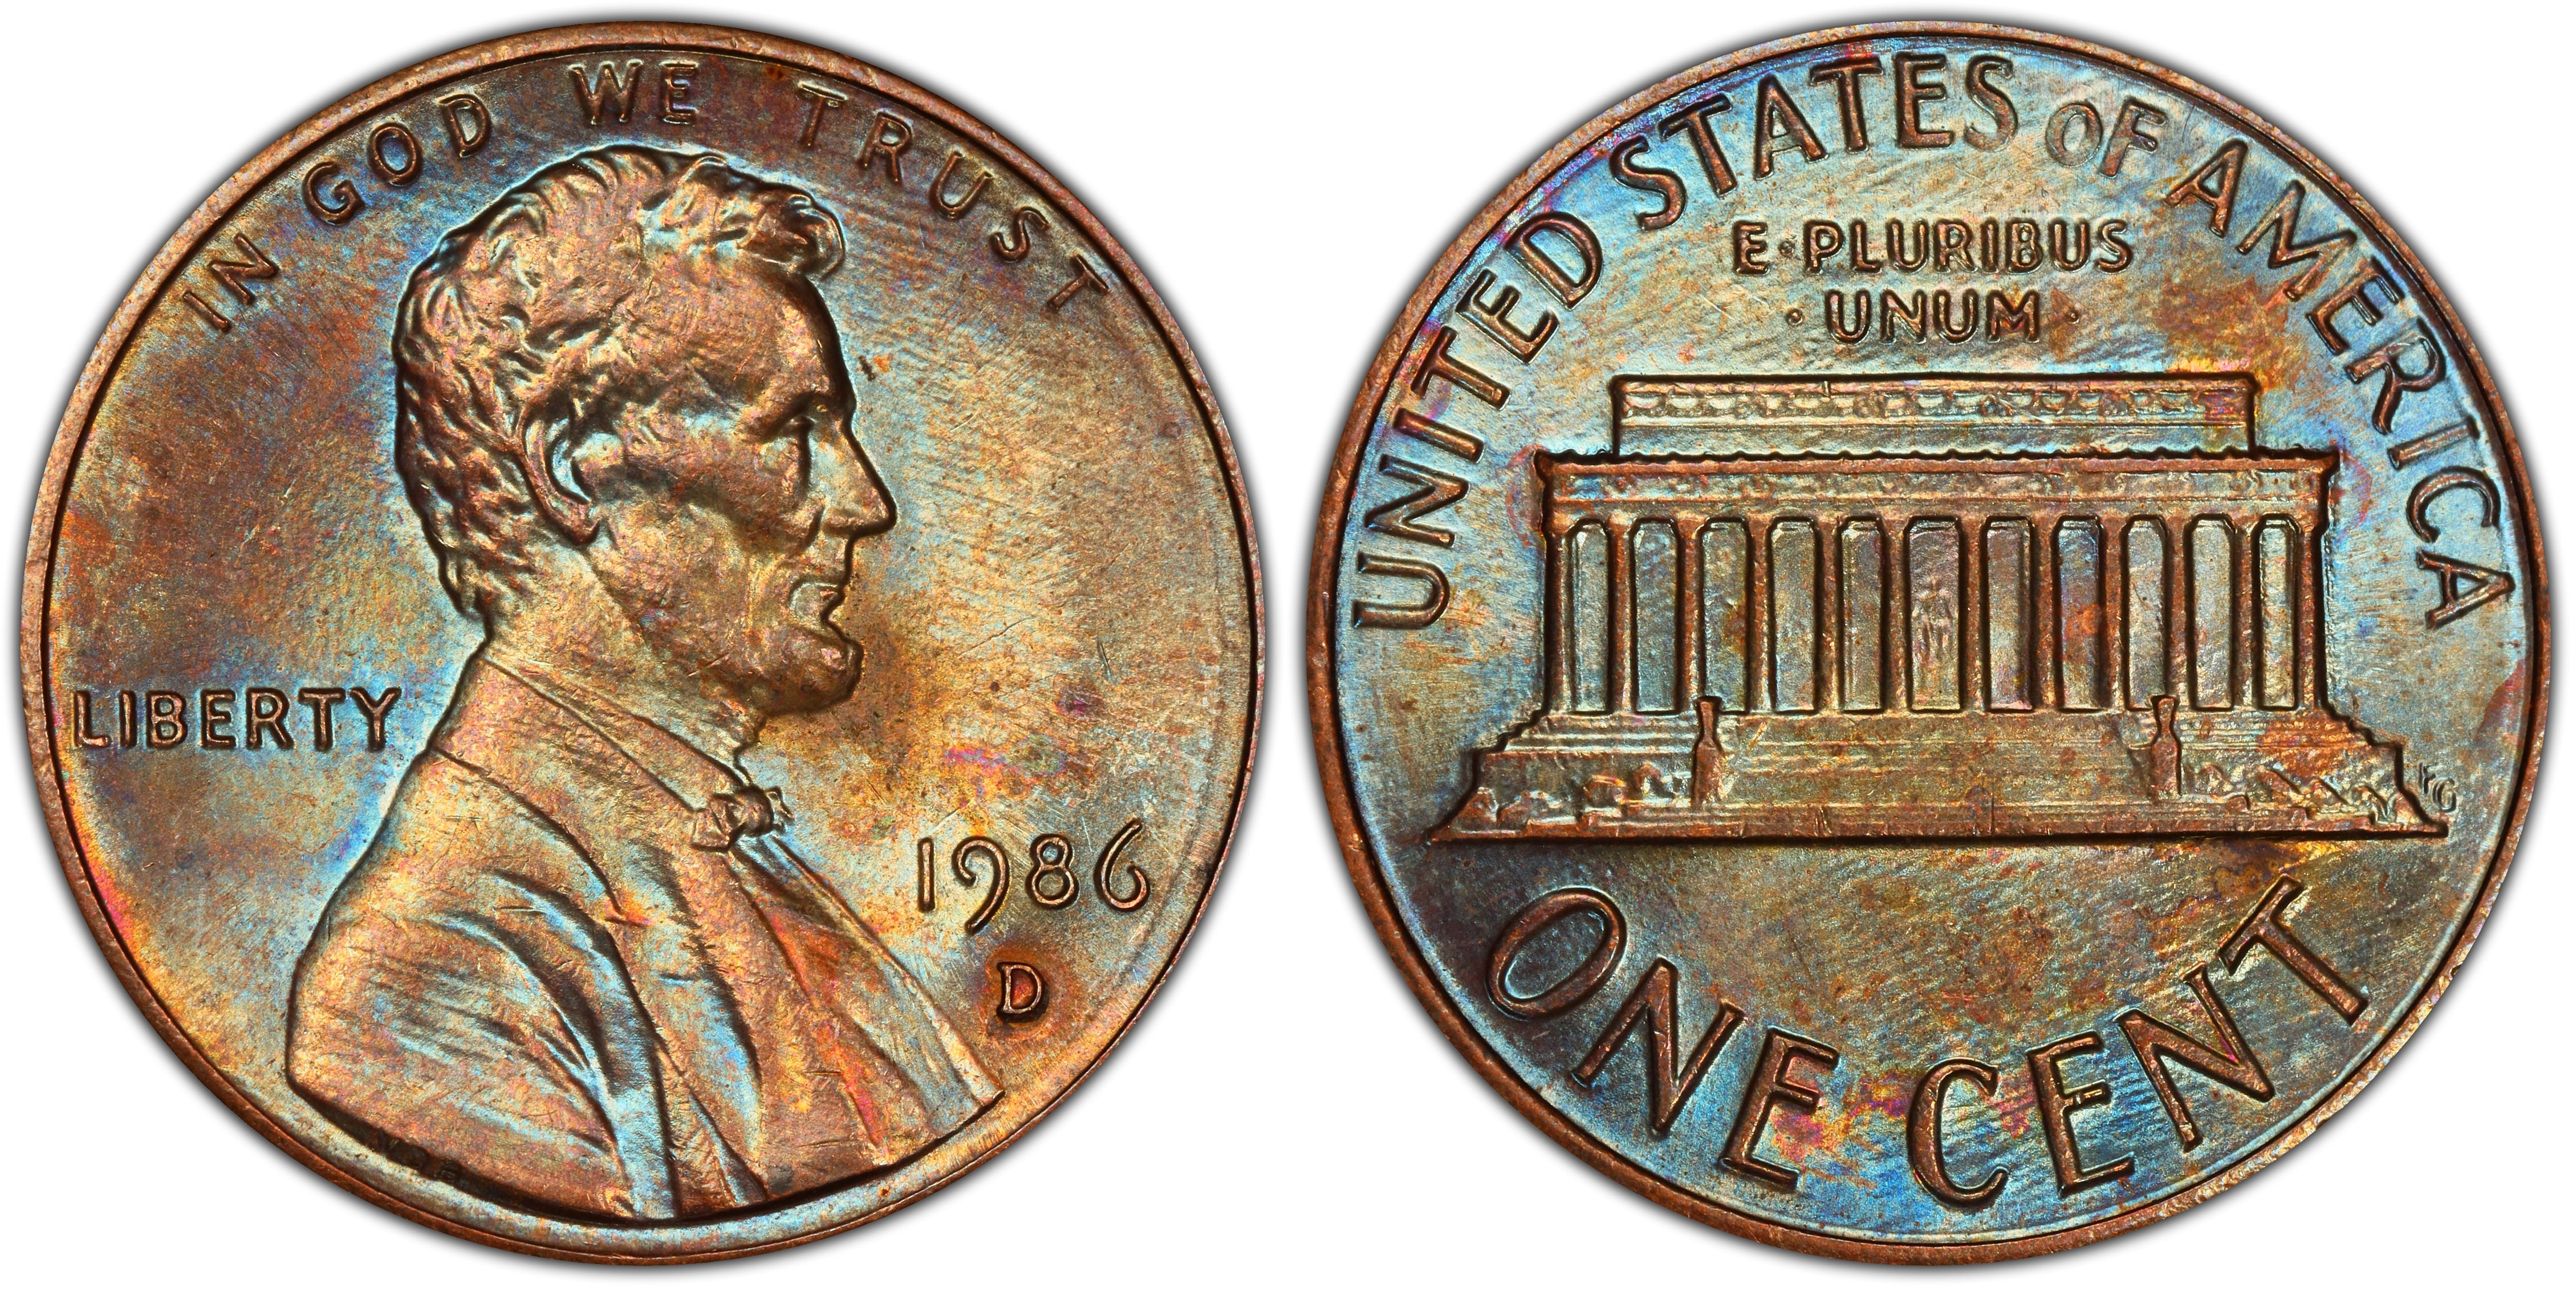 Value of 1986 Lincoln Cents